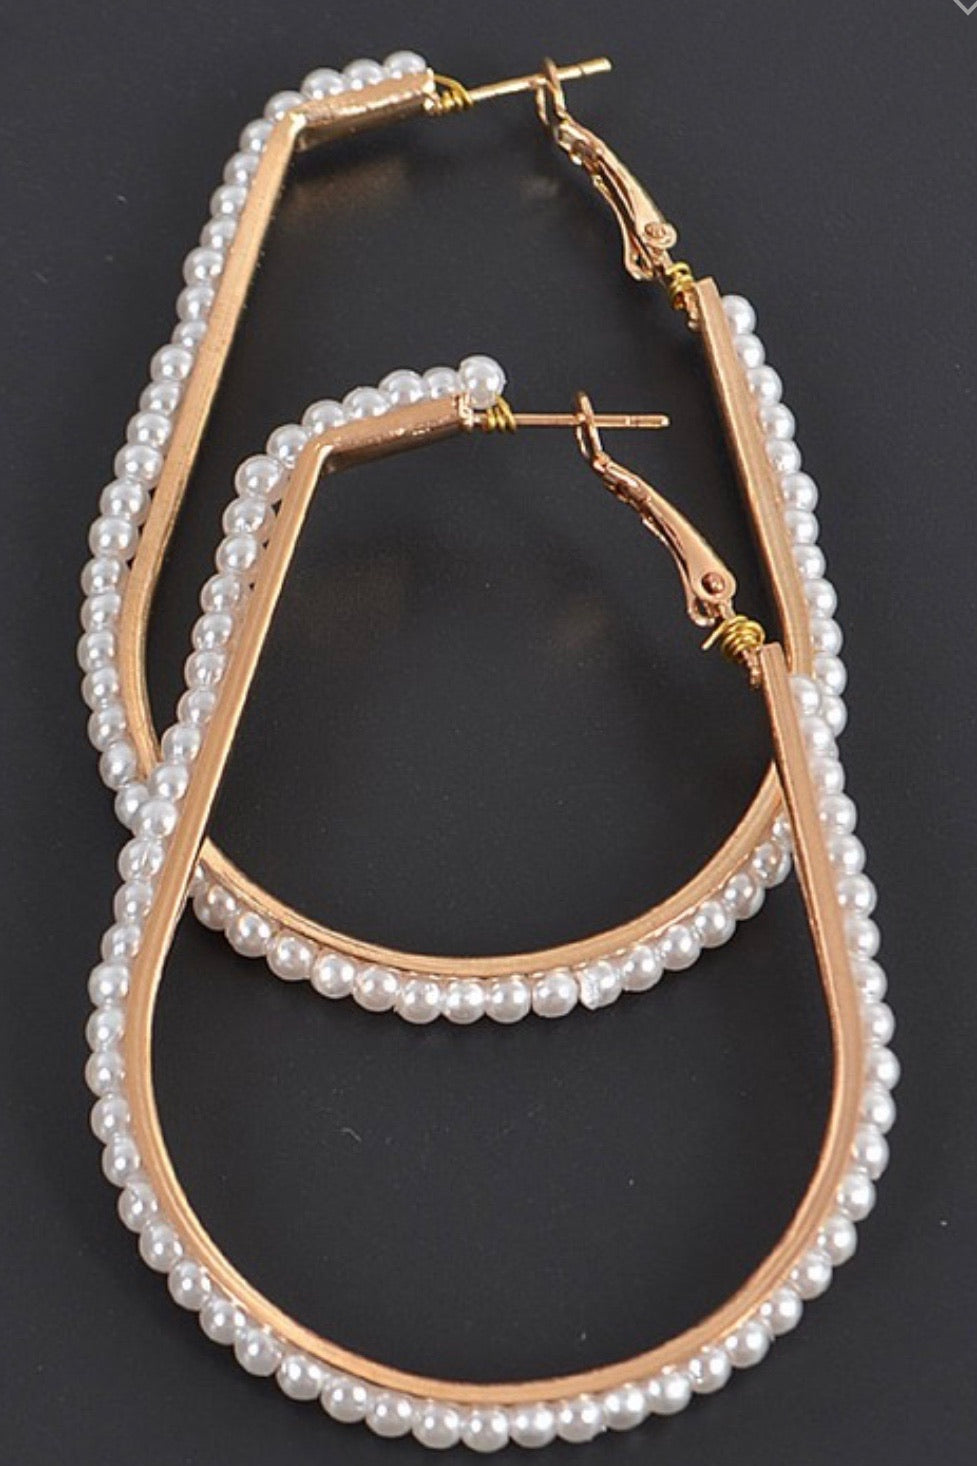 Ivory Oblong Hoop Earrings Lined with Pearls